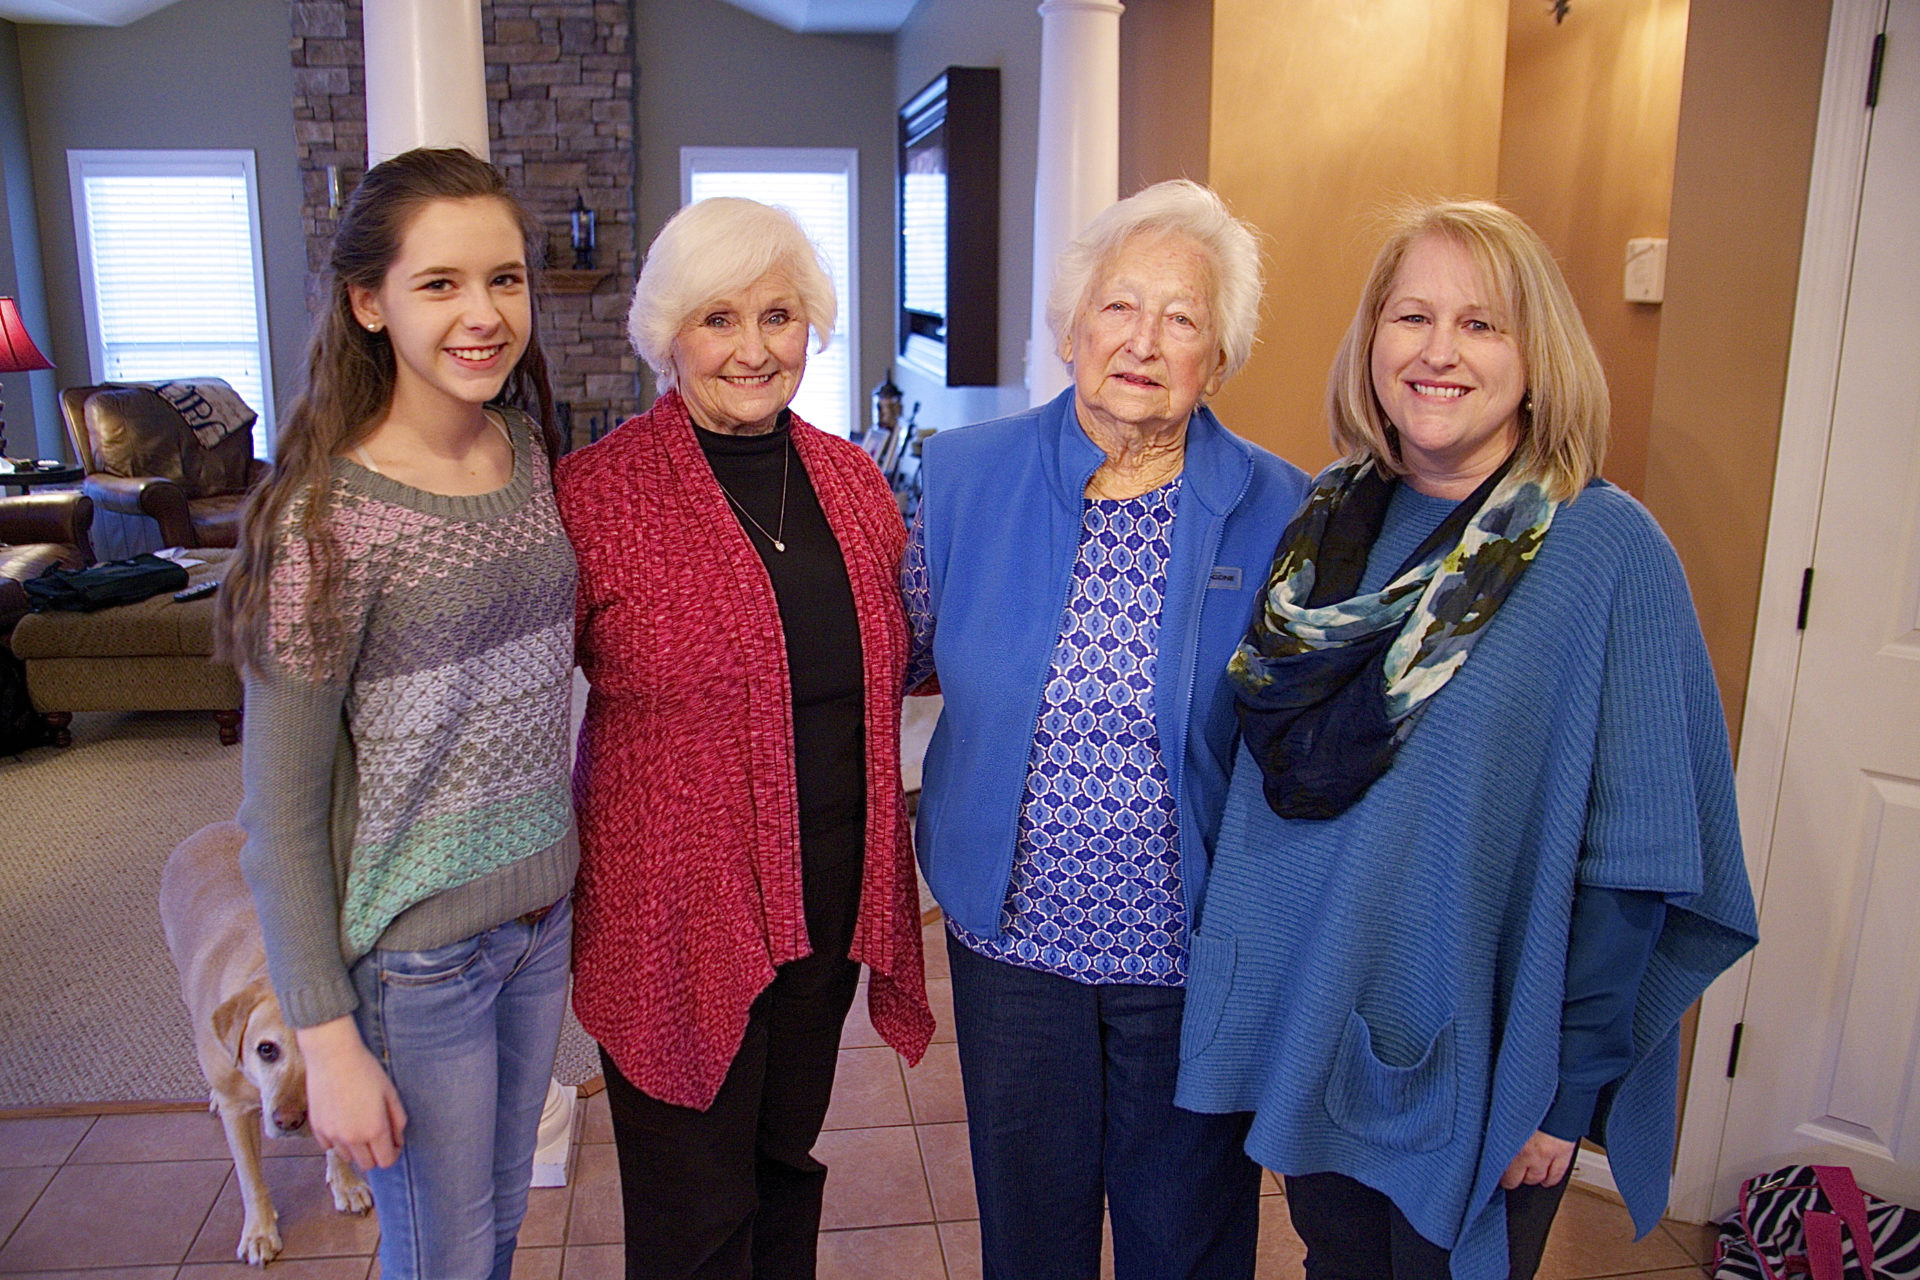 Caroline Williamson, Jean Rice, Elizabeth Burns and Sheryl Williamson are four generations of a family descended from original Germanna settlers.